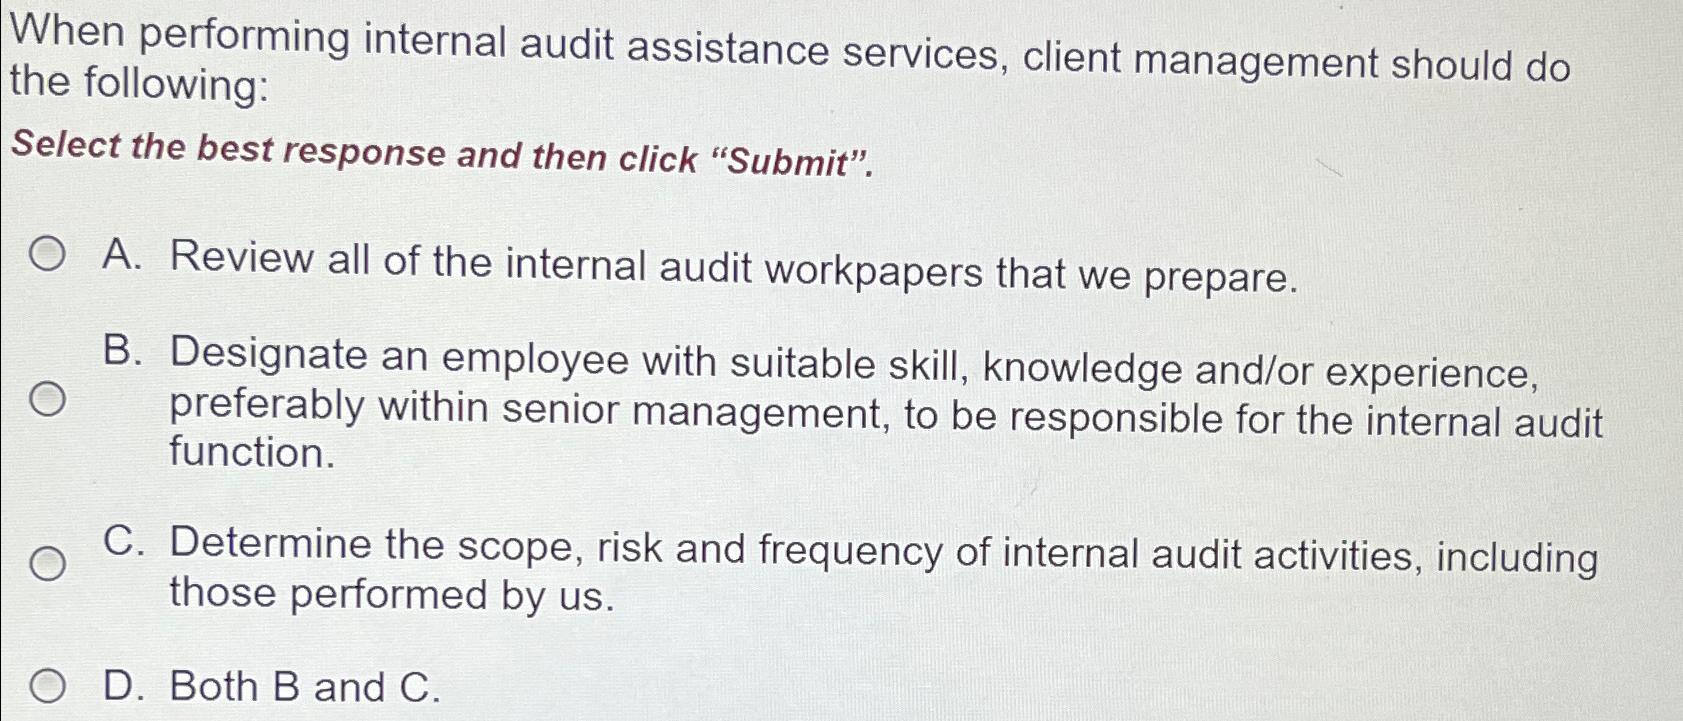 When performing internal audit assistance services, client management should do the following: Select the